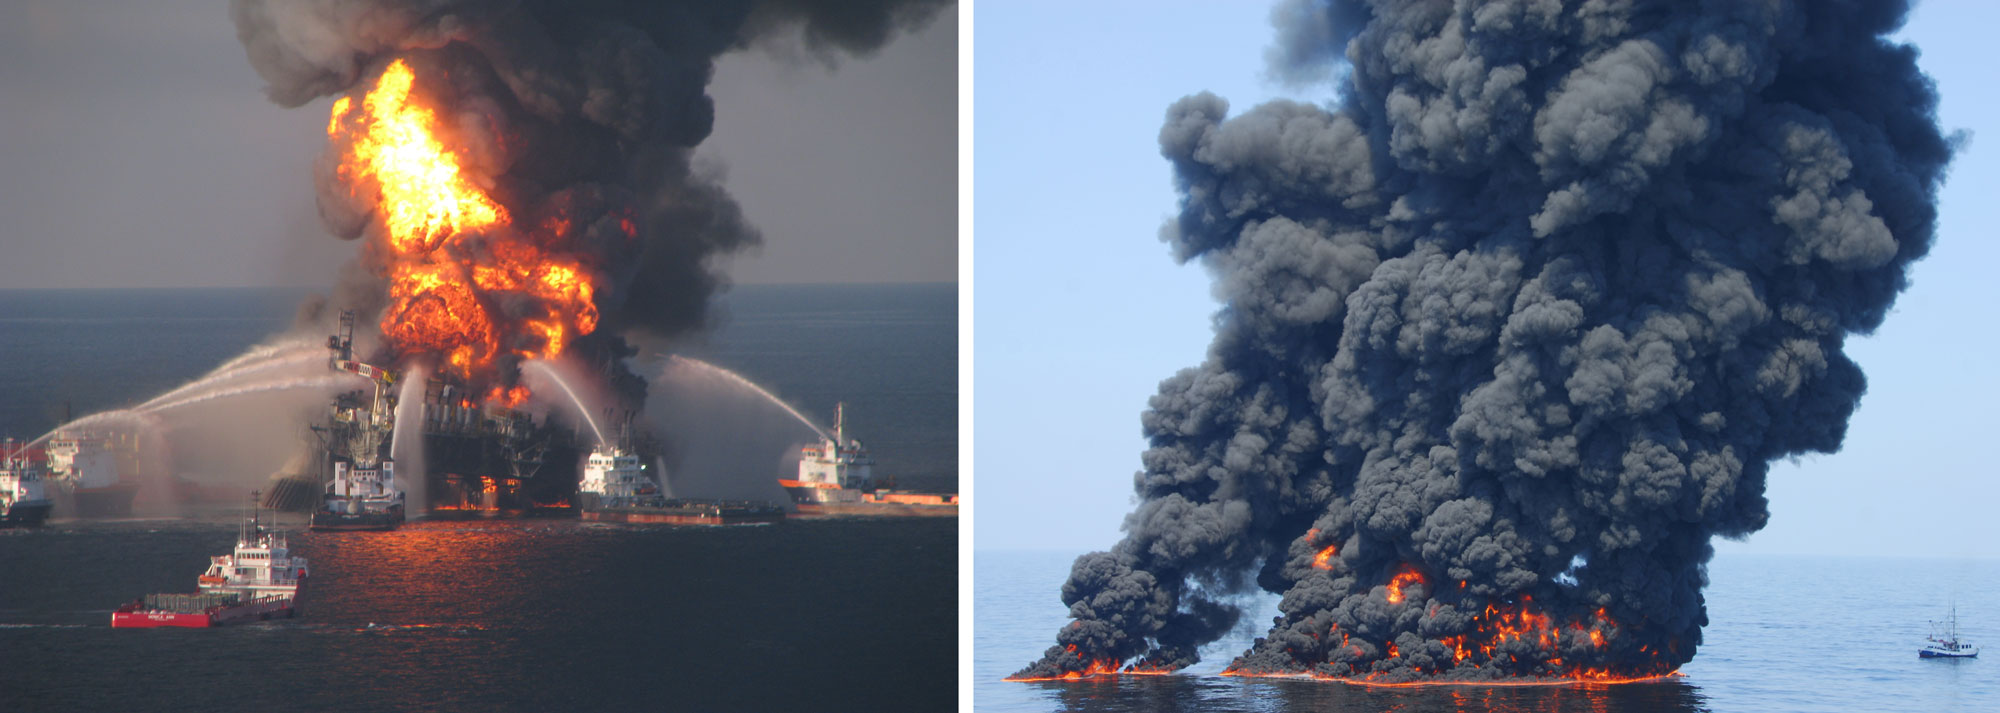 2-Panel image showing the Deepwater Horizon oil spill in 2010. Panel 1: Deepwater Horizon oil platform on fire, with fire boats spraying water to extinguish the flames. Panel 2: An oil slick being intentionally burned.